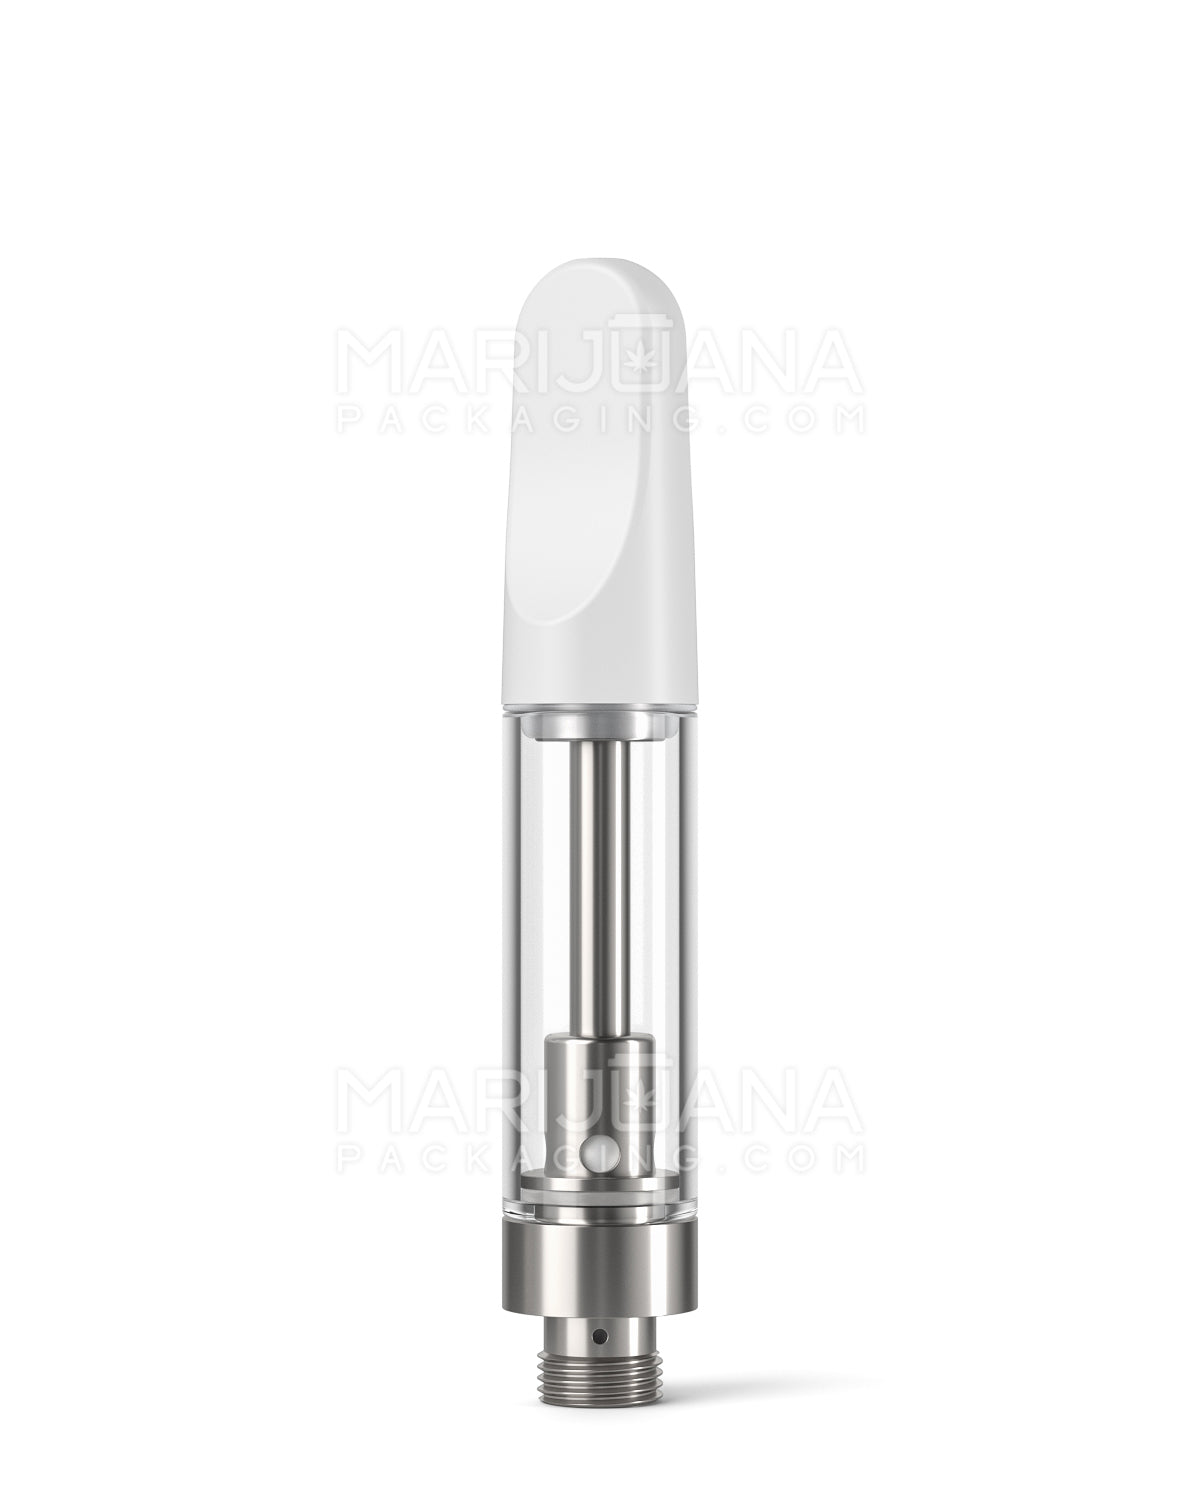 CCELL | Liquid6 Reactor Glass Vape Cartridge with White Plastic Mouthpiece | 1mL - Screw On - 100 Count - 1